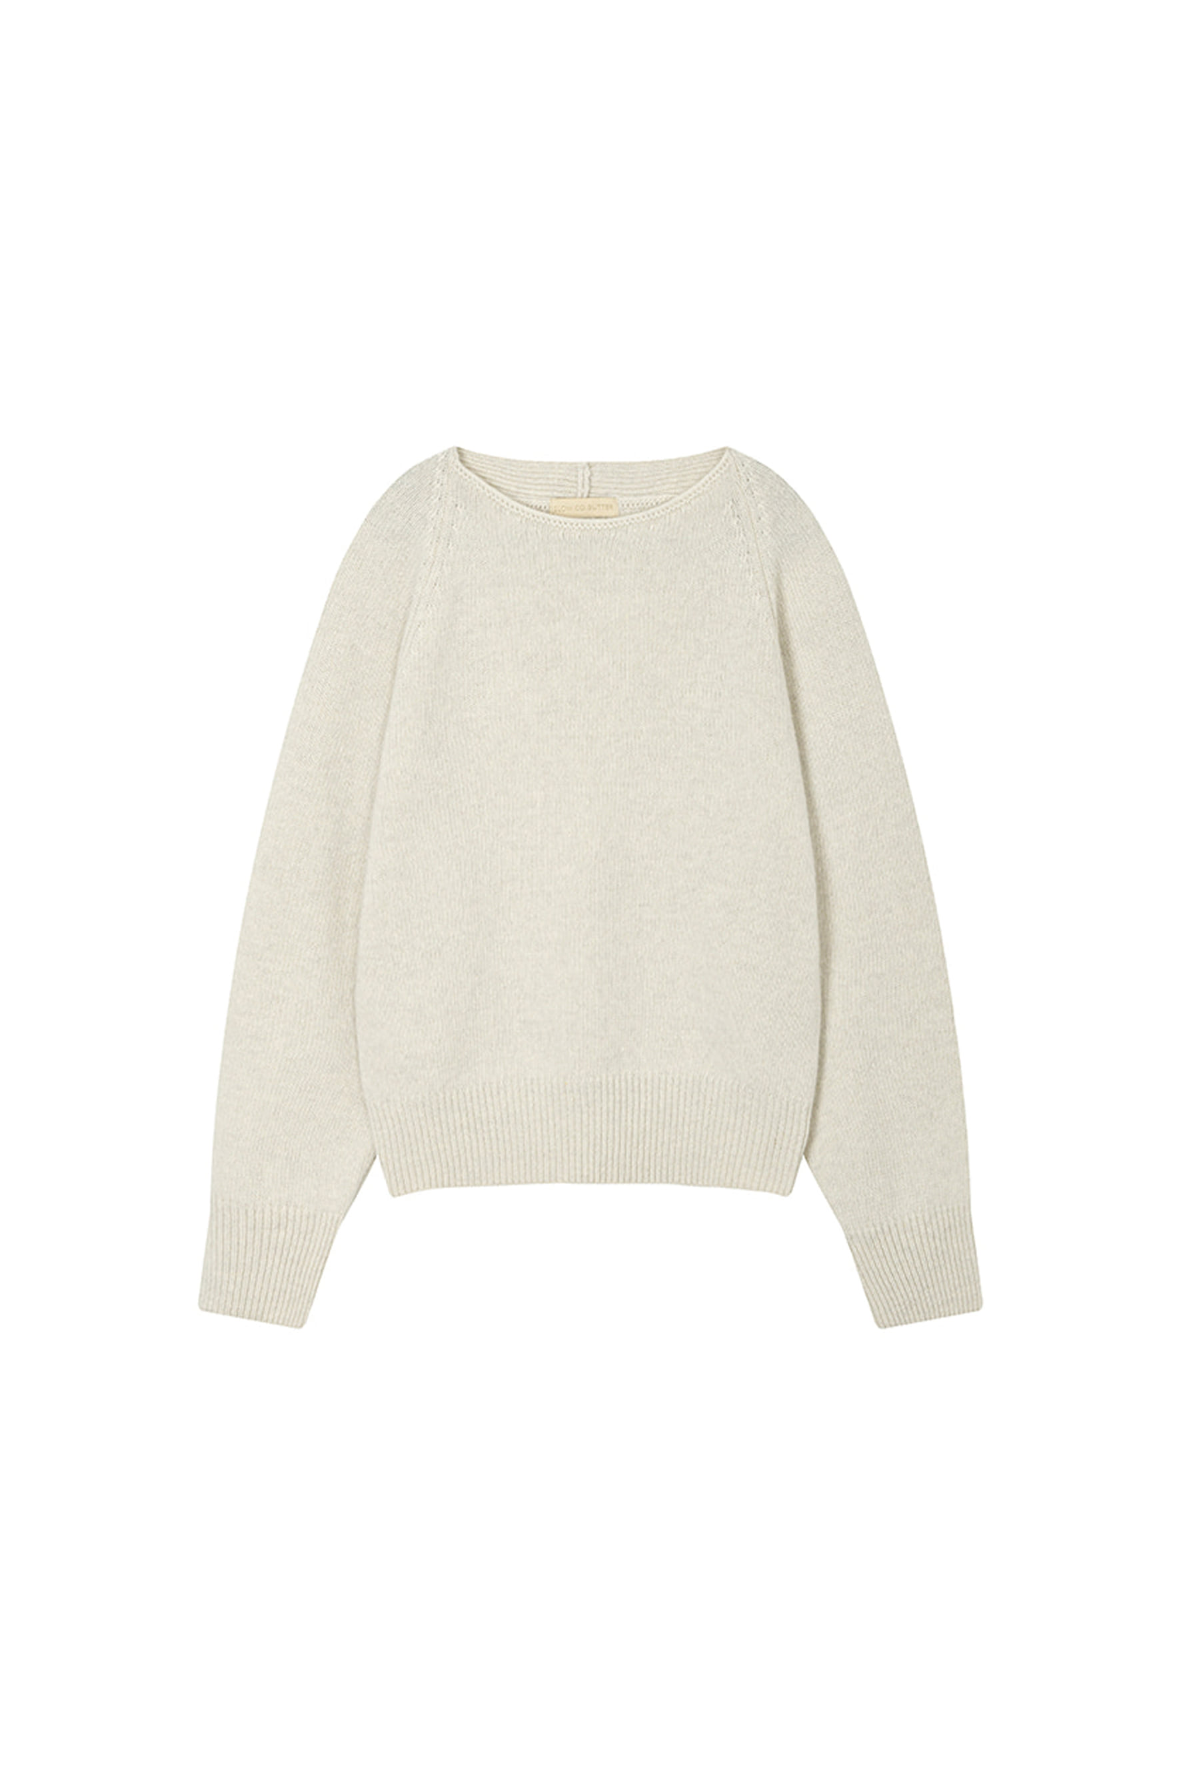 [SLOCO] Silhouette cashmere knit, salted